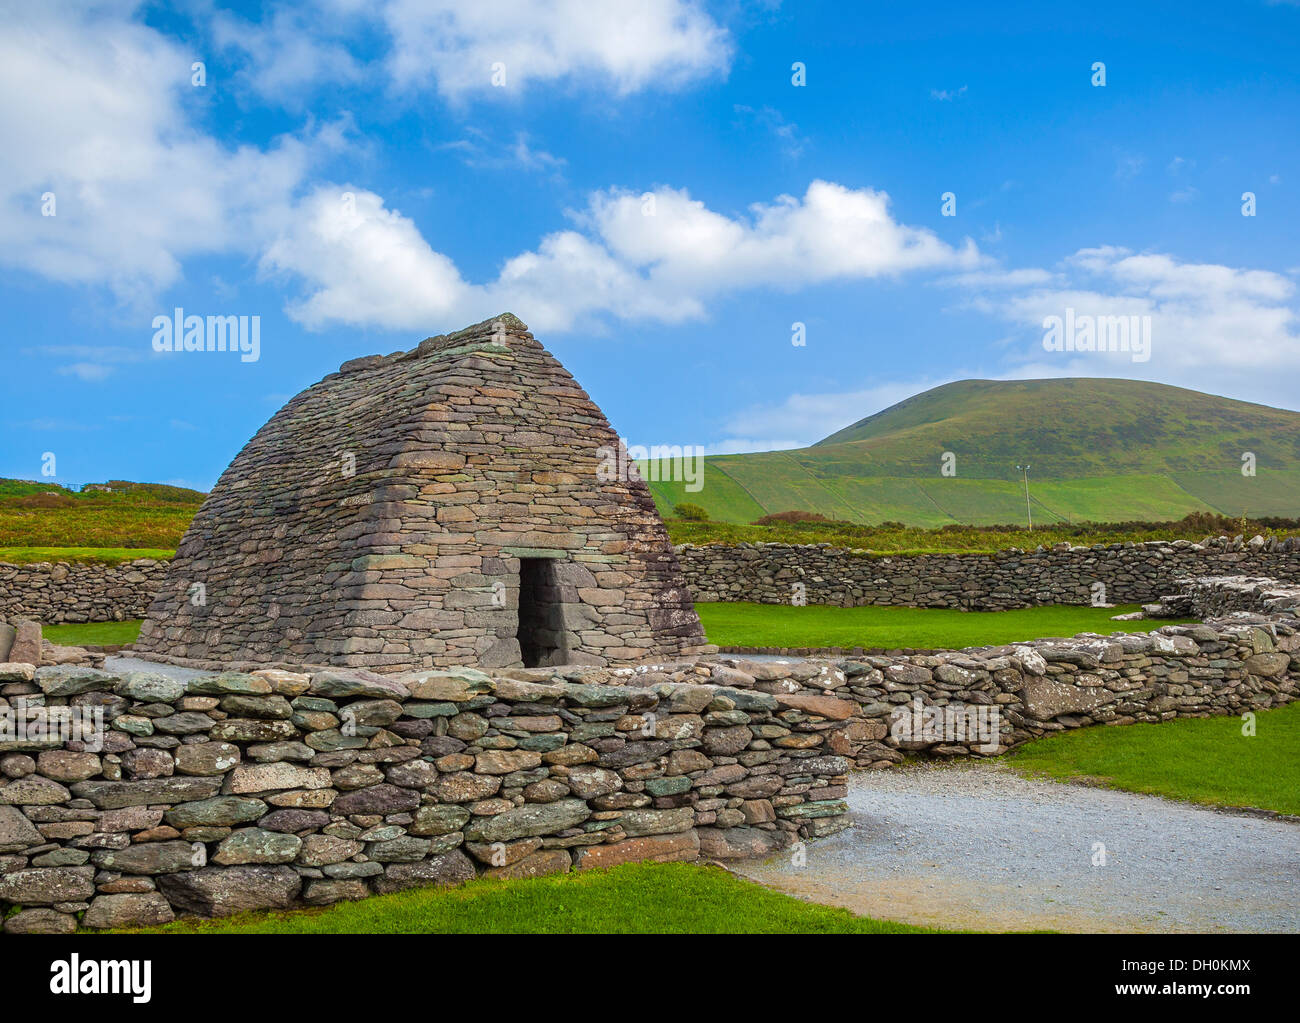 County Kerry, Ireland: Gallarus Oratory on the Dingle Peninsula, built between the 6th and 9th century. Stock Photo